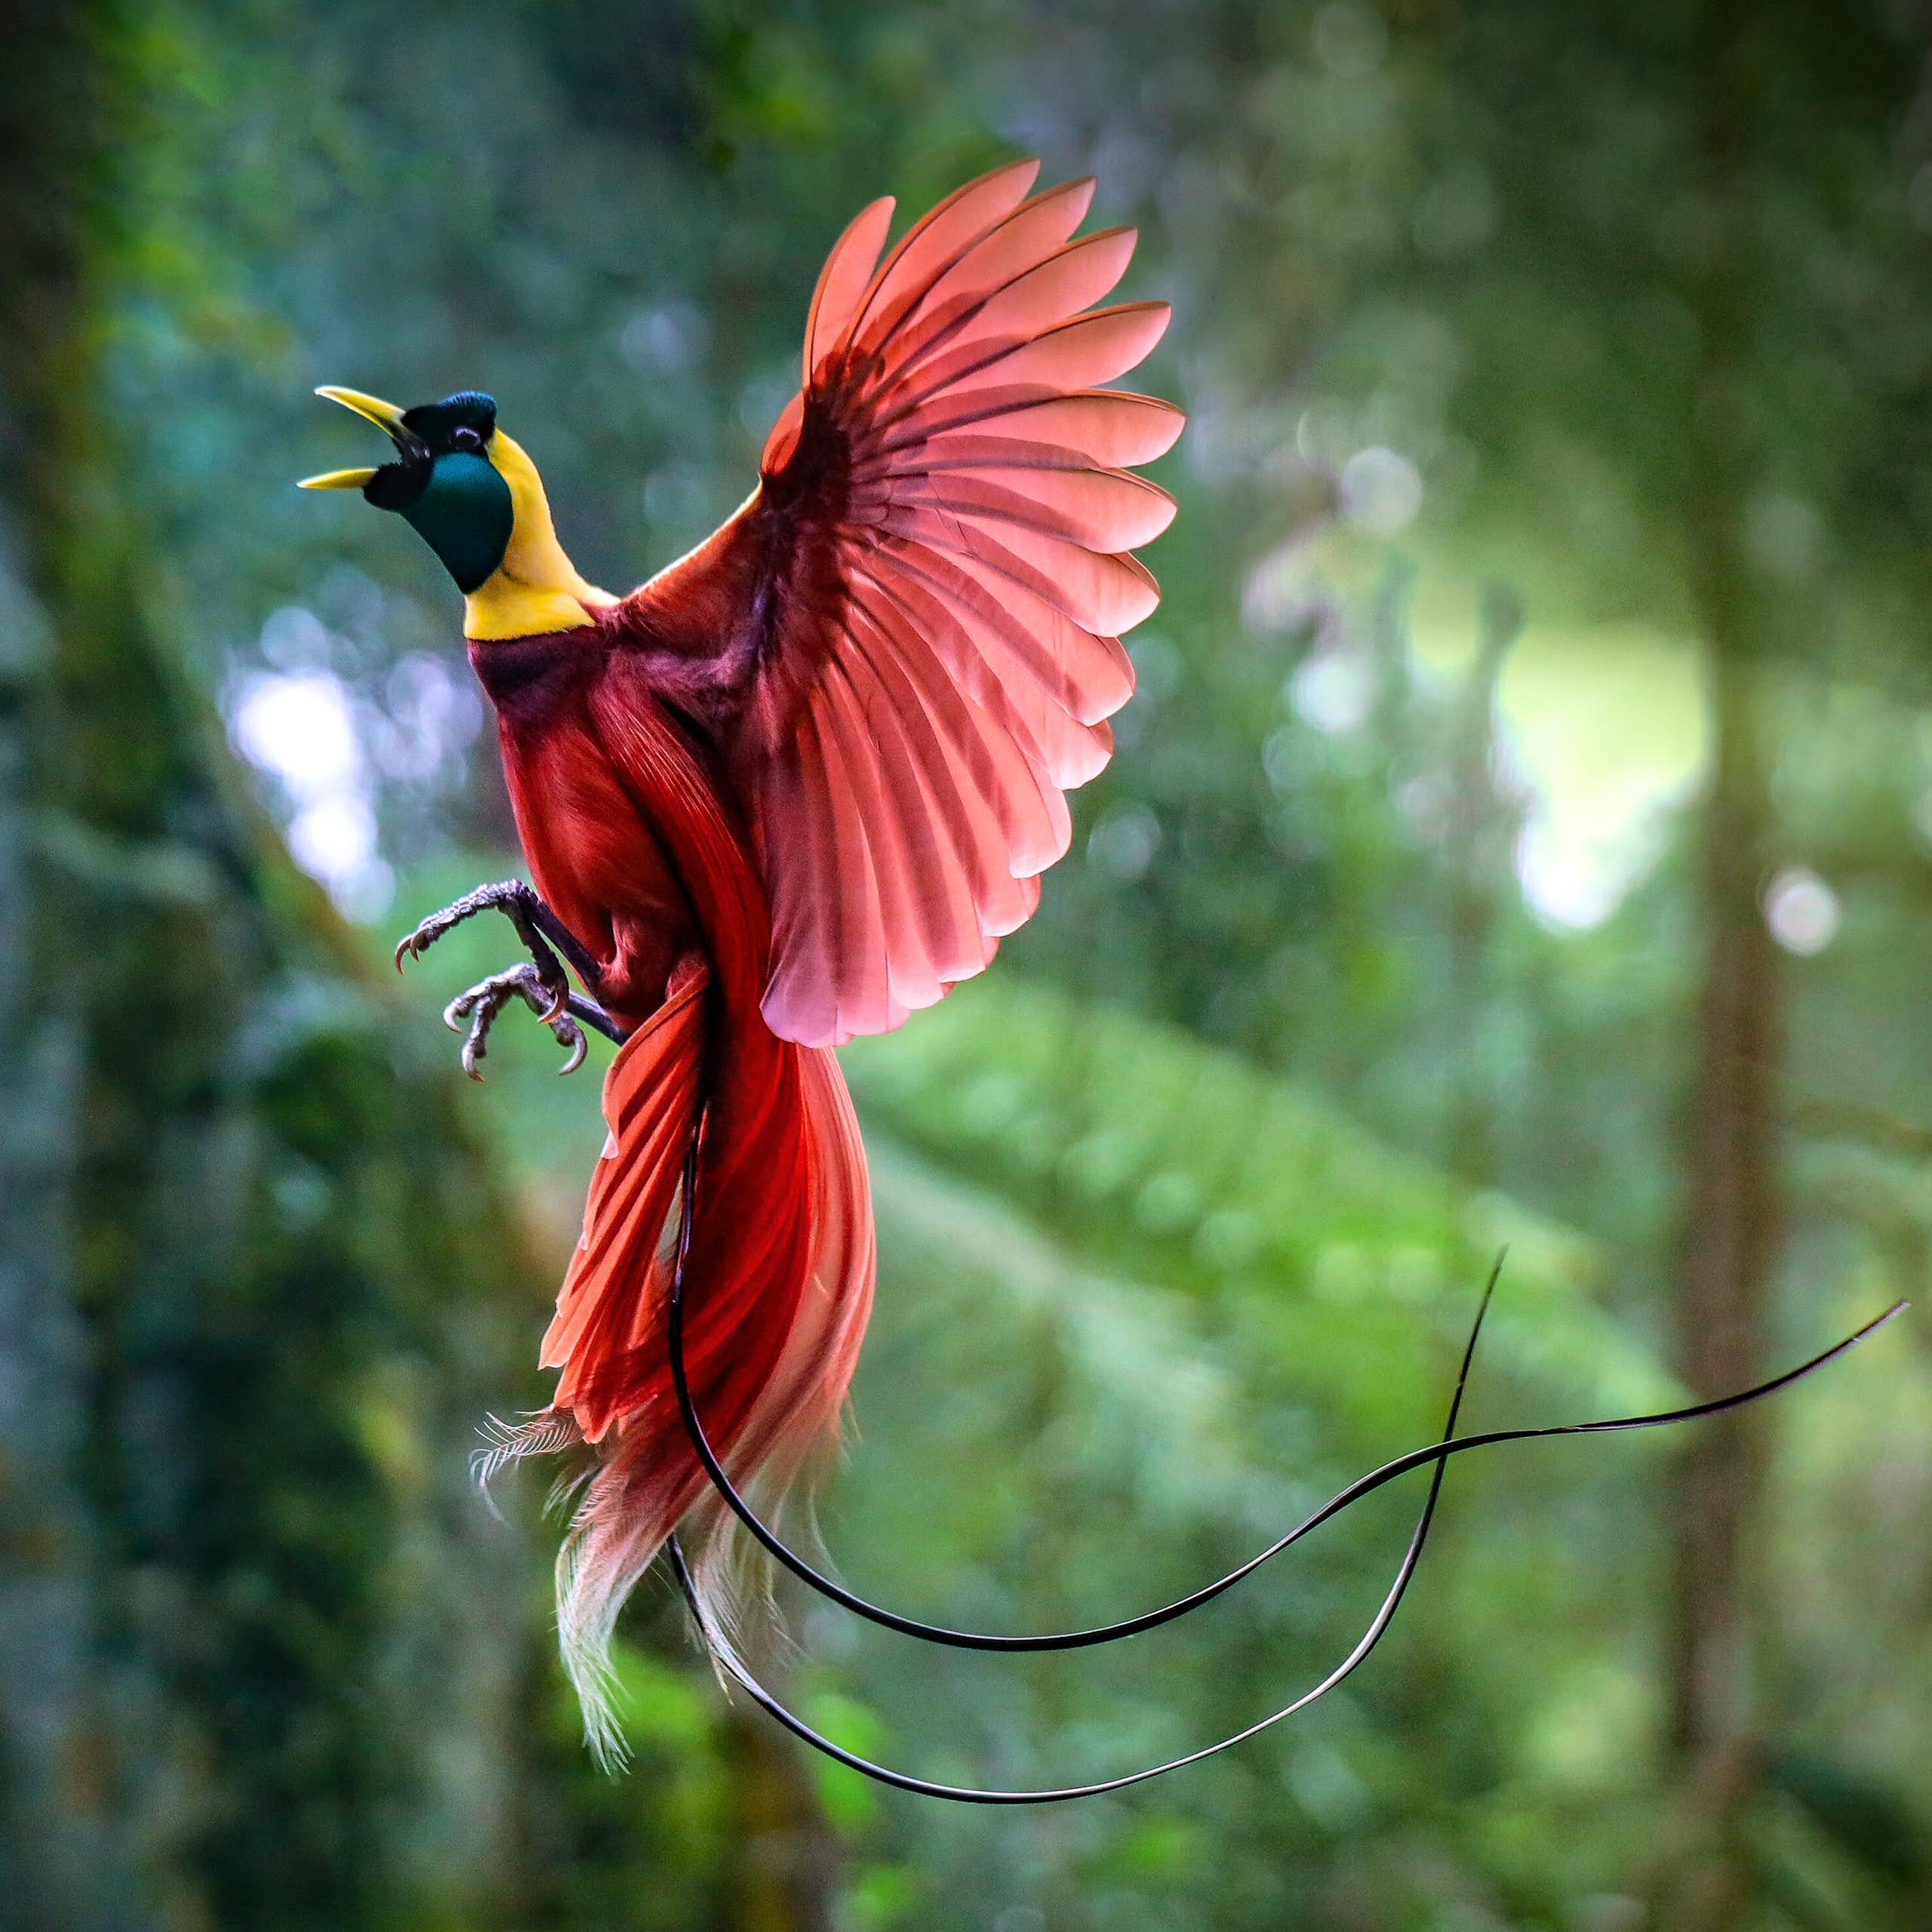 A magnificent red bird with yellow and green head caught mid flight against a jungle backdrop.